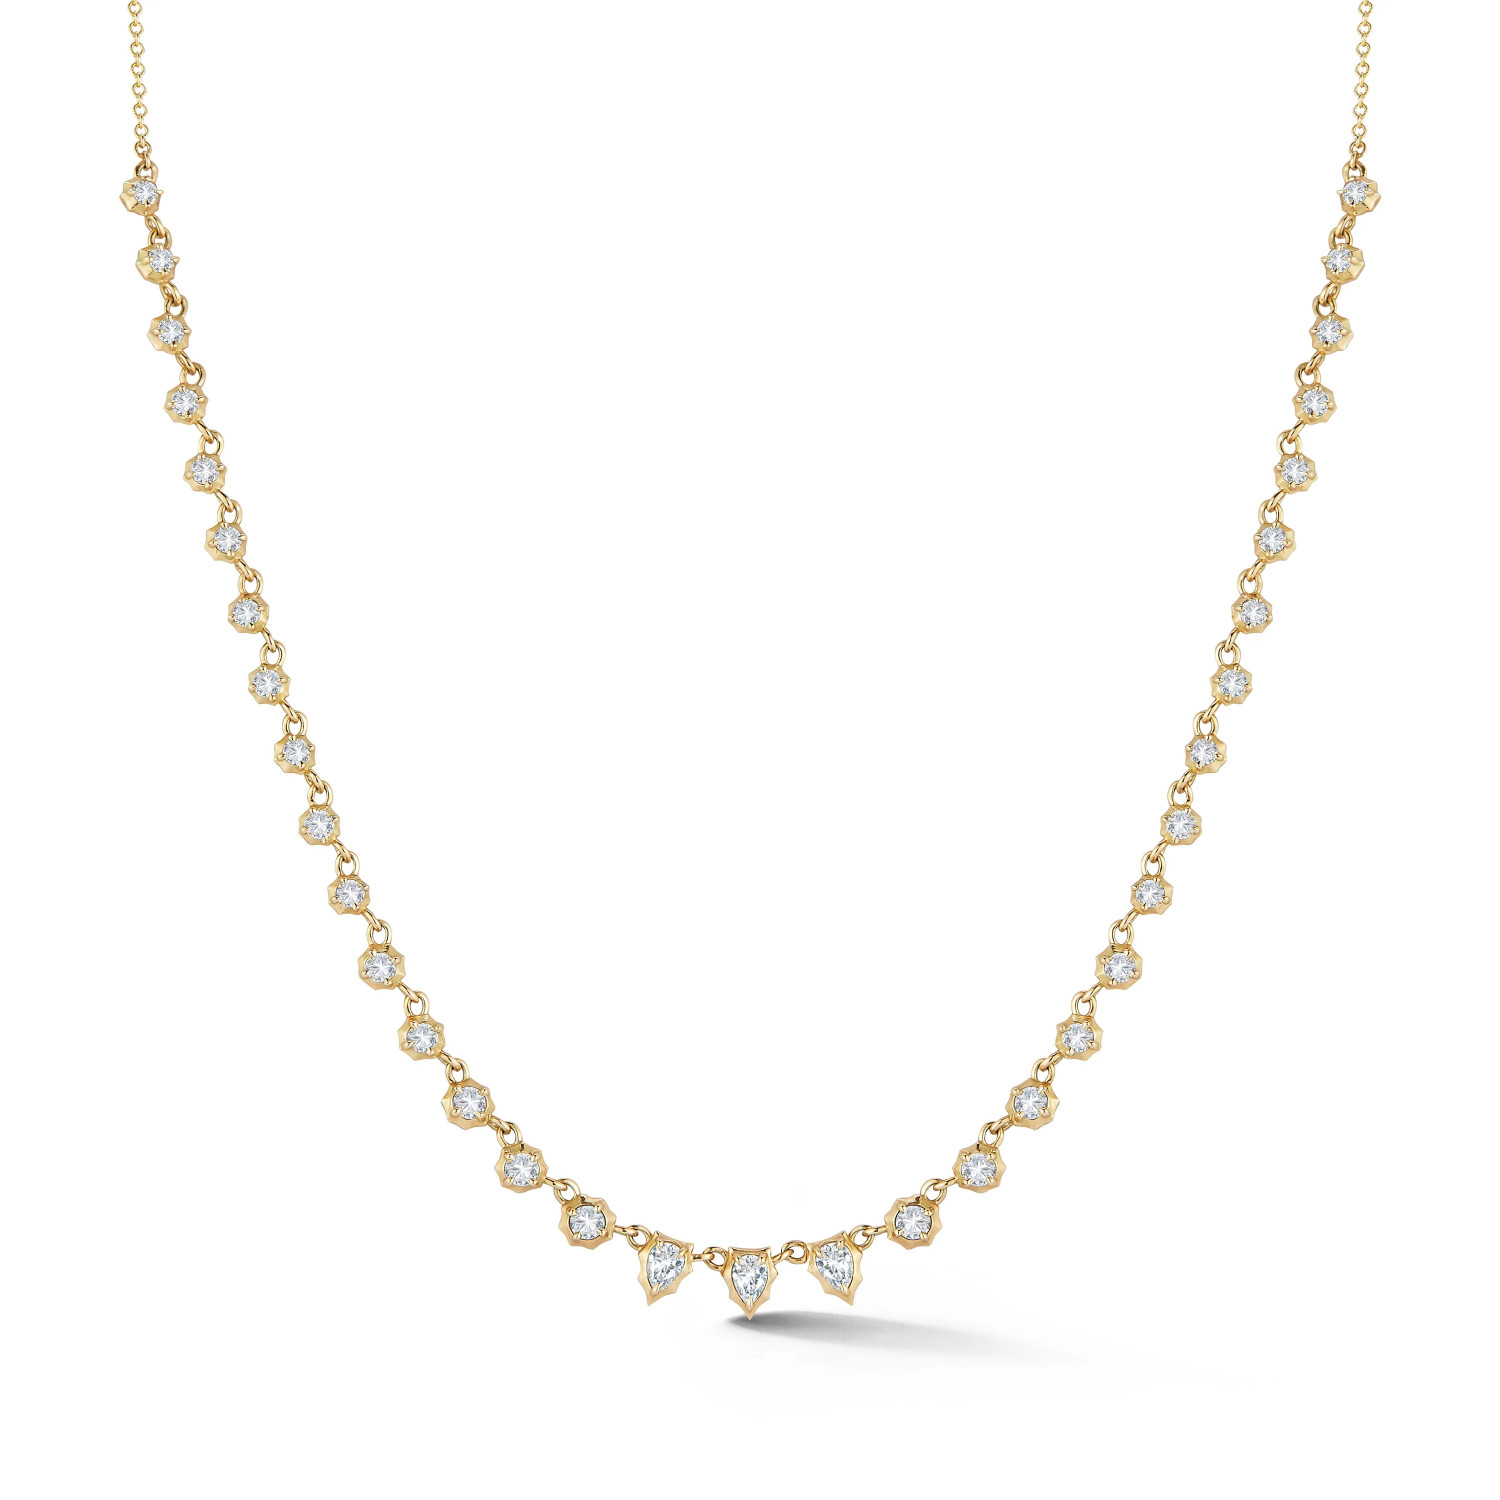 Small Envoy Riviera Necklace in 18K Yellow Gold